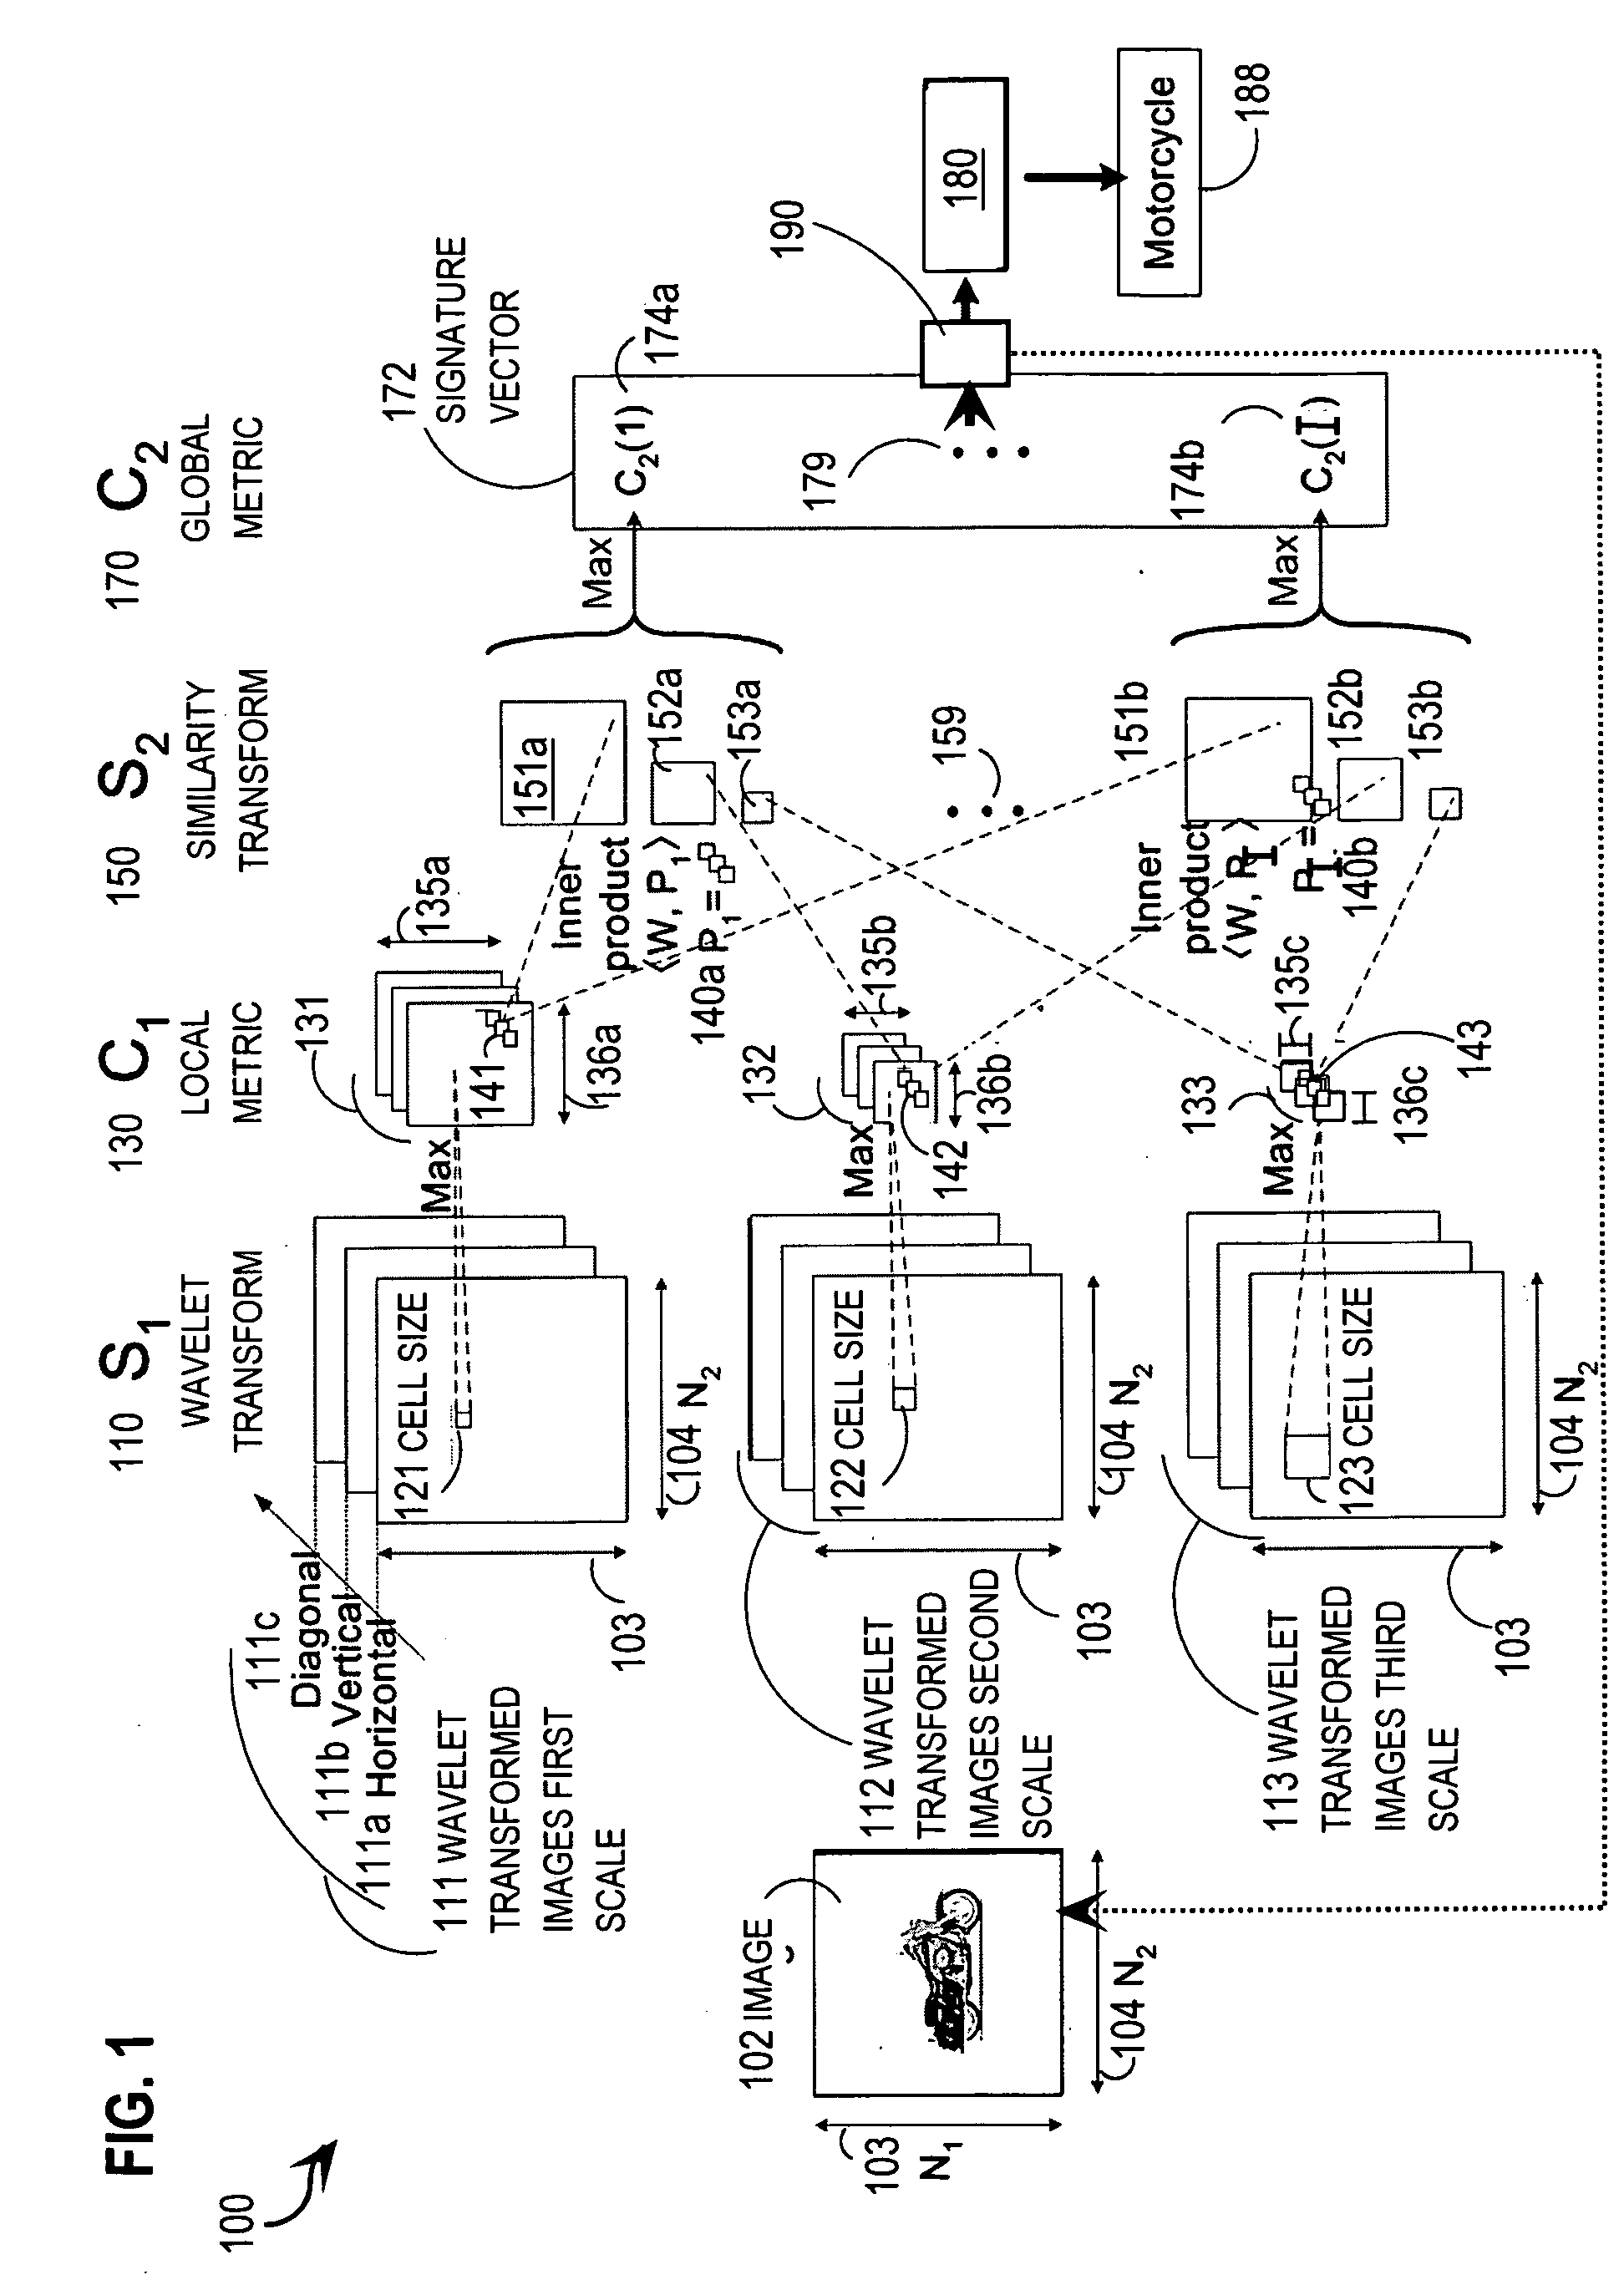 Fast pattern classification based on a sparse transform